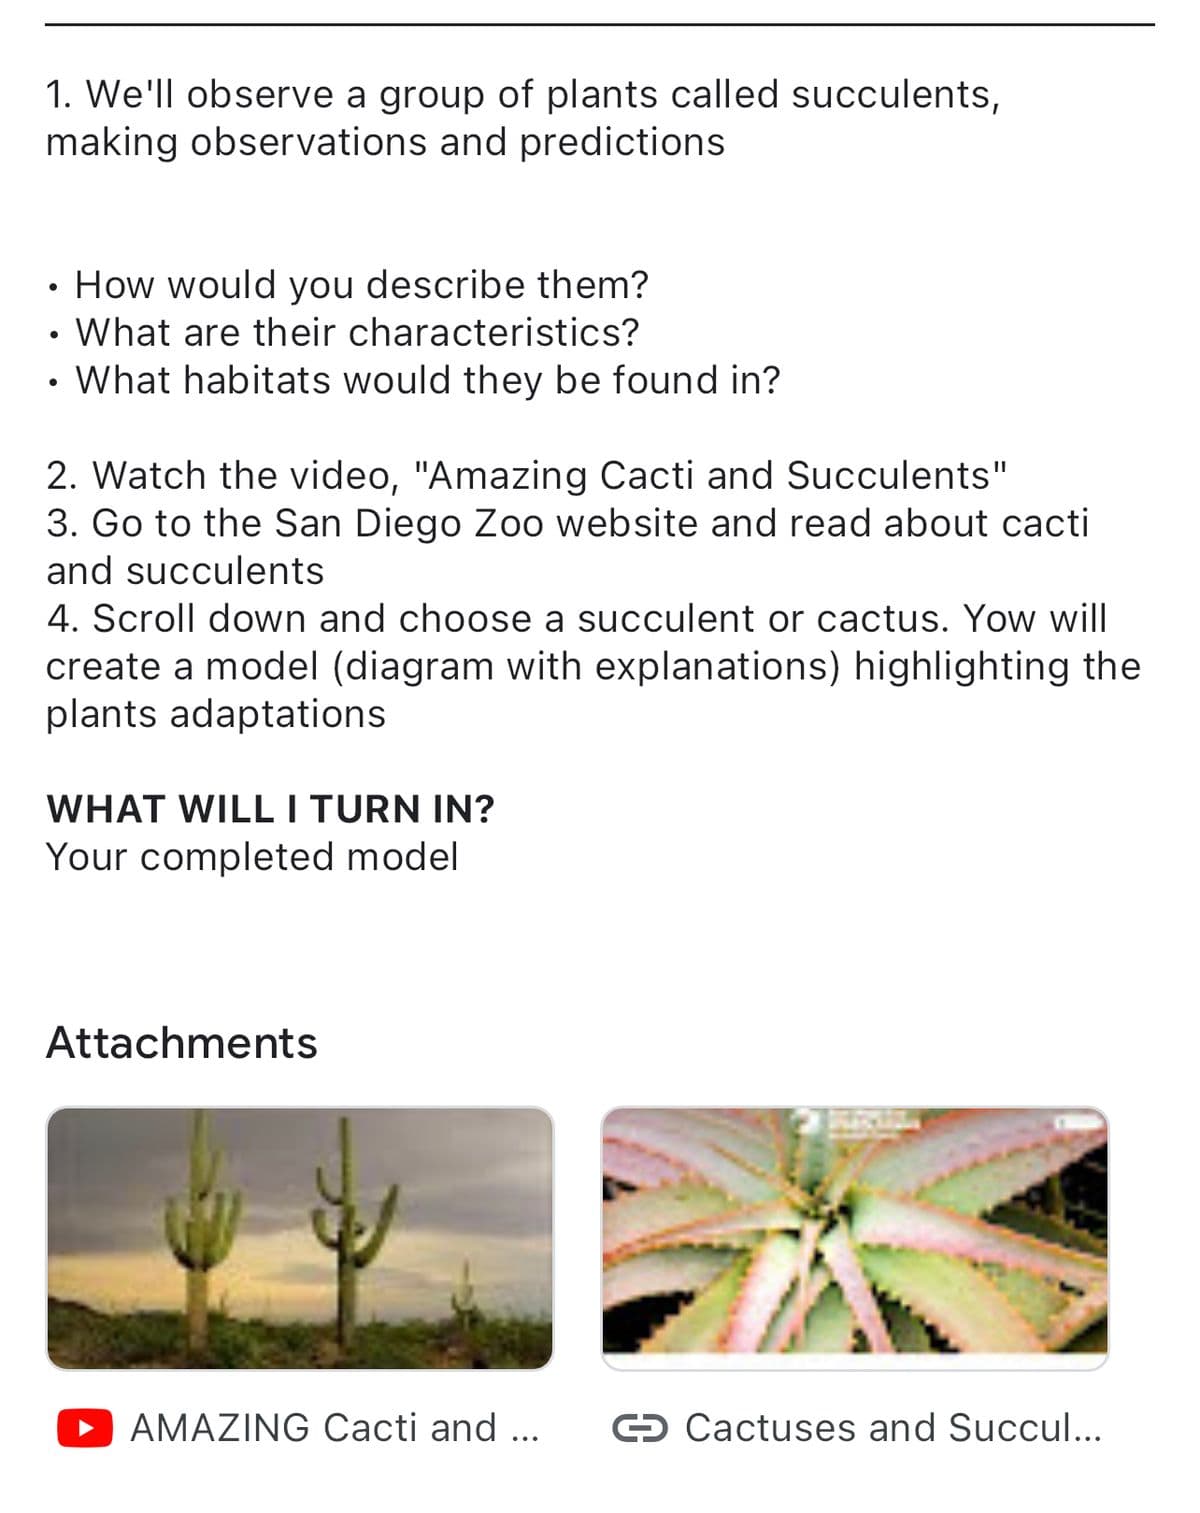 1. We'll observe a group of plants called succulents,
making observations and predictions
How would you describe them?
What are their characteristics?
• What habitats would they be found in?
2. Watch the video, "Amazing Cacti and Succulents"
3. Go to the San Diego Zoo website and read about cacti
and succulents
4. Scroll down and choose a succulent or cactus. Yow will
create a model (diagram with explanations) highlighting the
plants adaptations
WHAT WILL I TURN IN?
Your completed model
Attachments
AMAZING Cacti and ...
Cactuses and Succul...